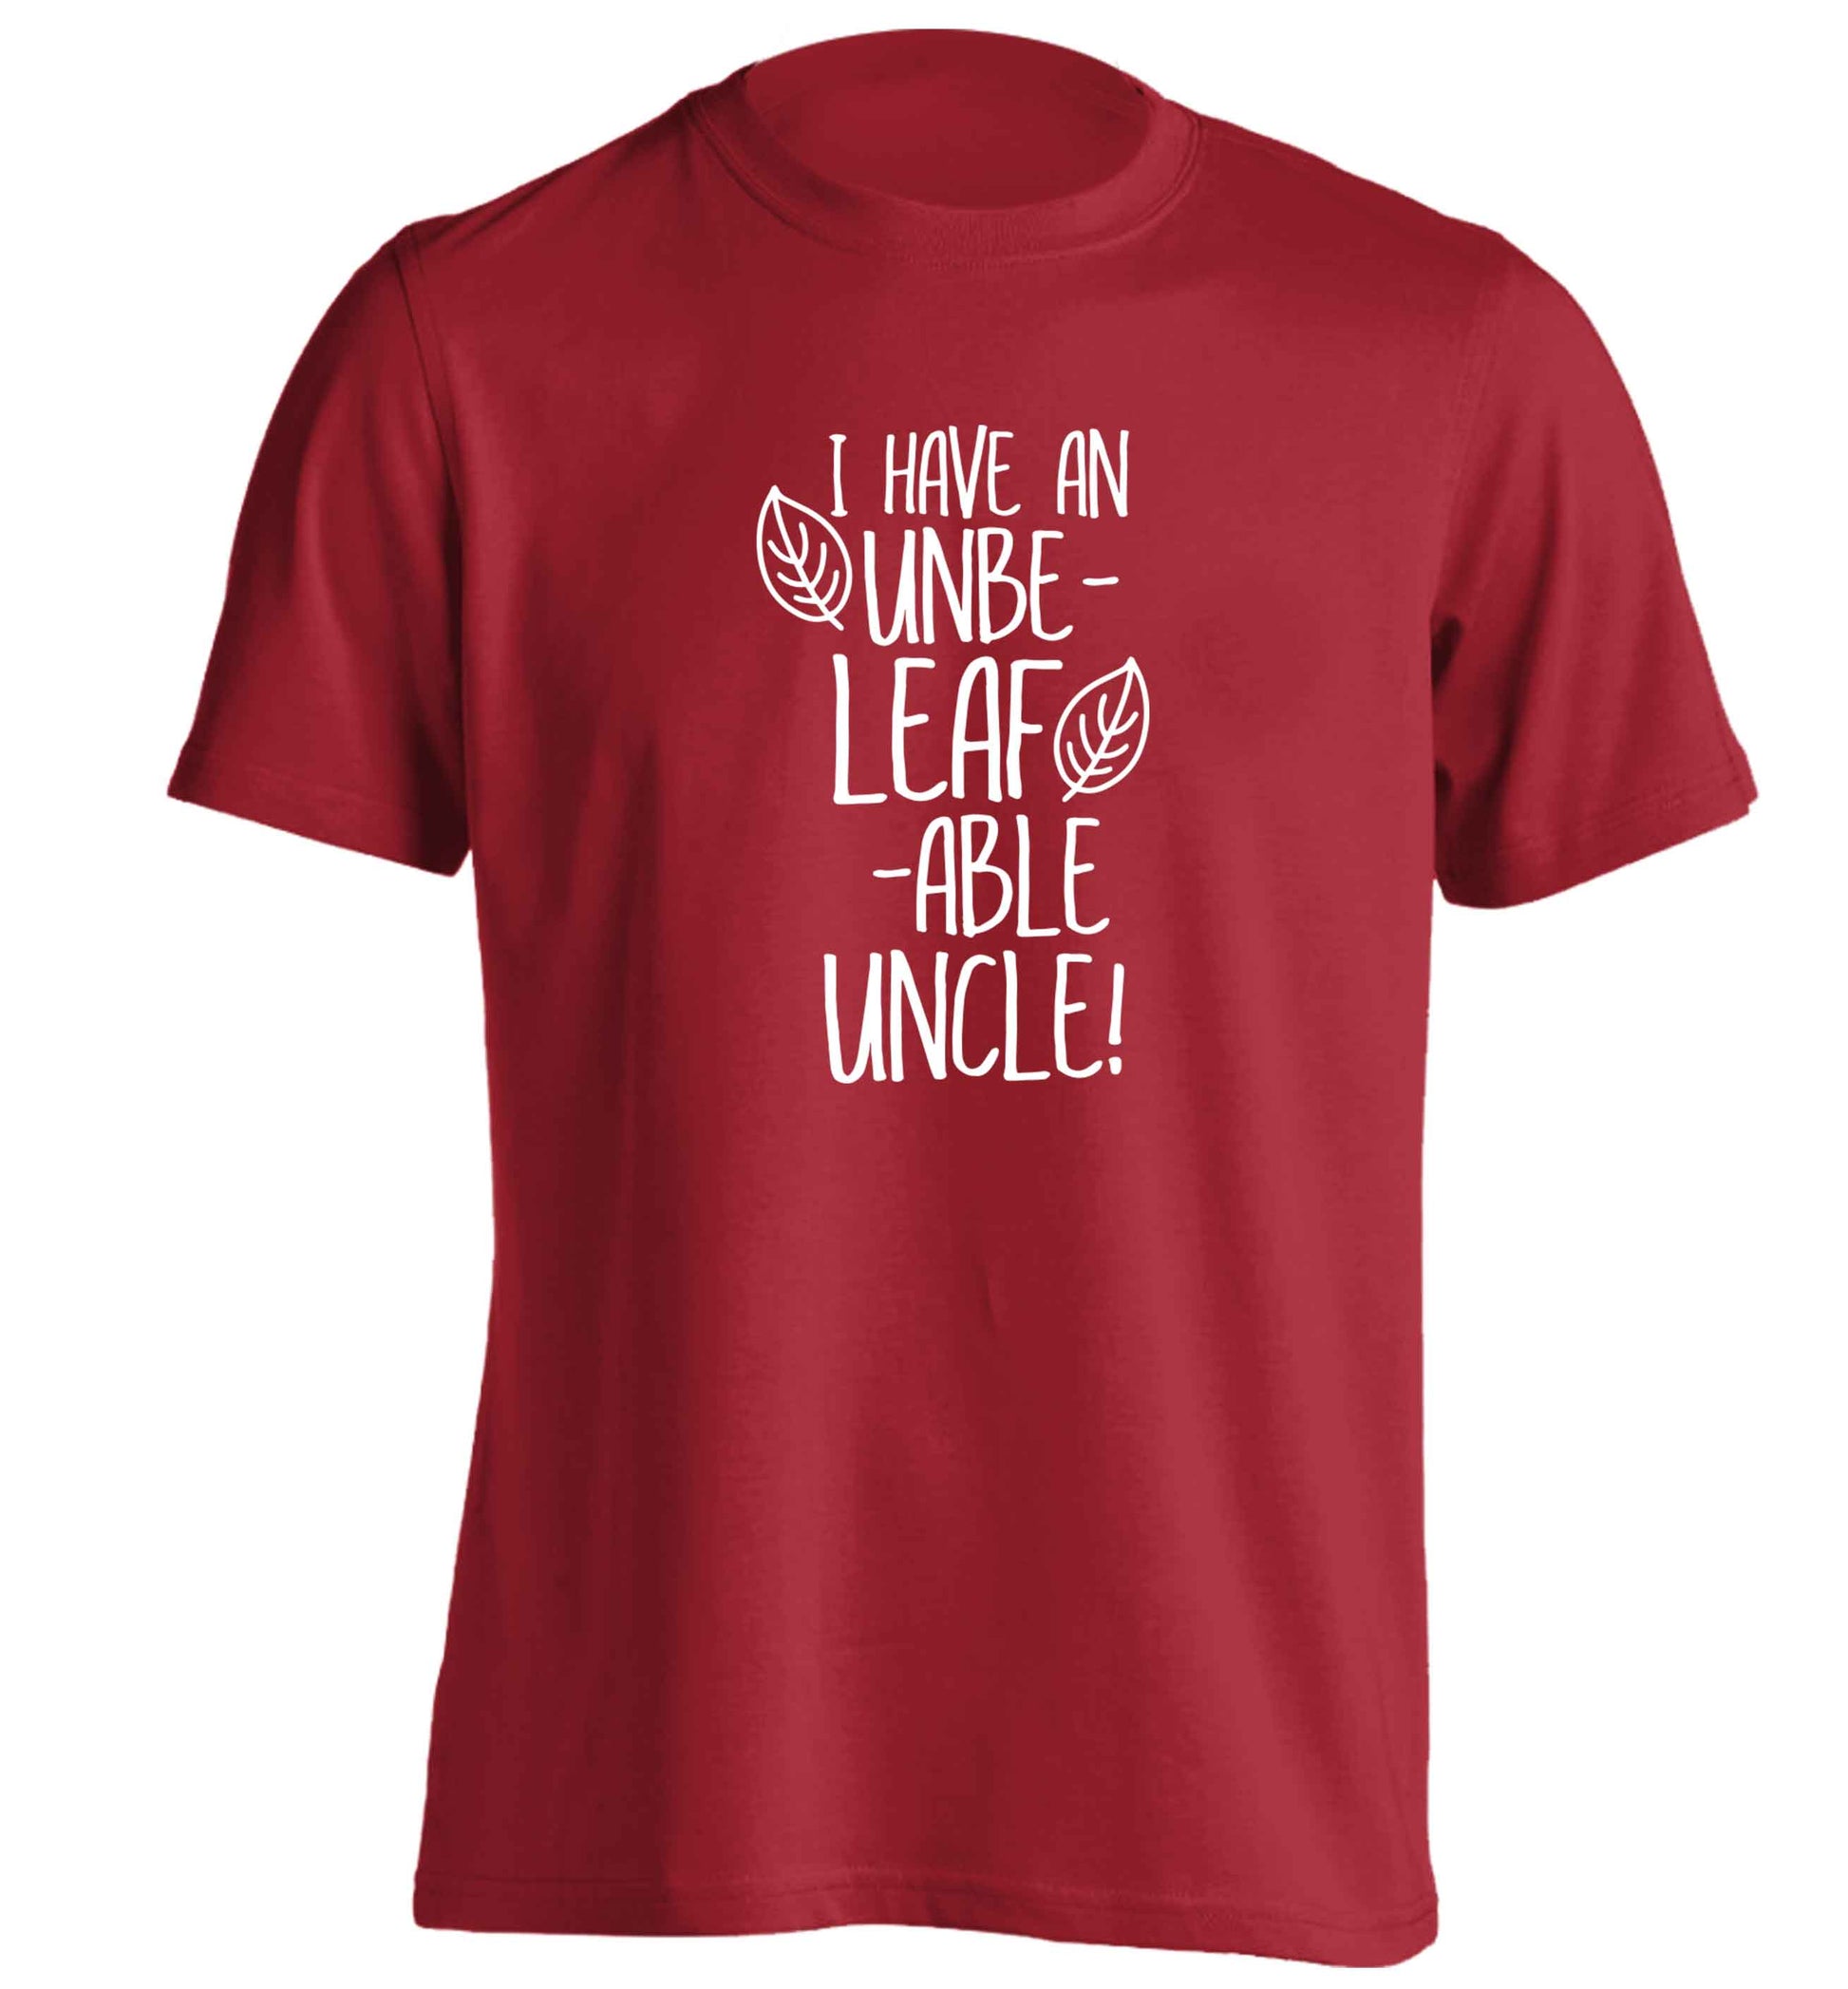 I have an unbe-leaf-able uncle adults unisex red Tshirt 2XL